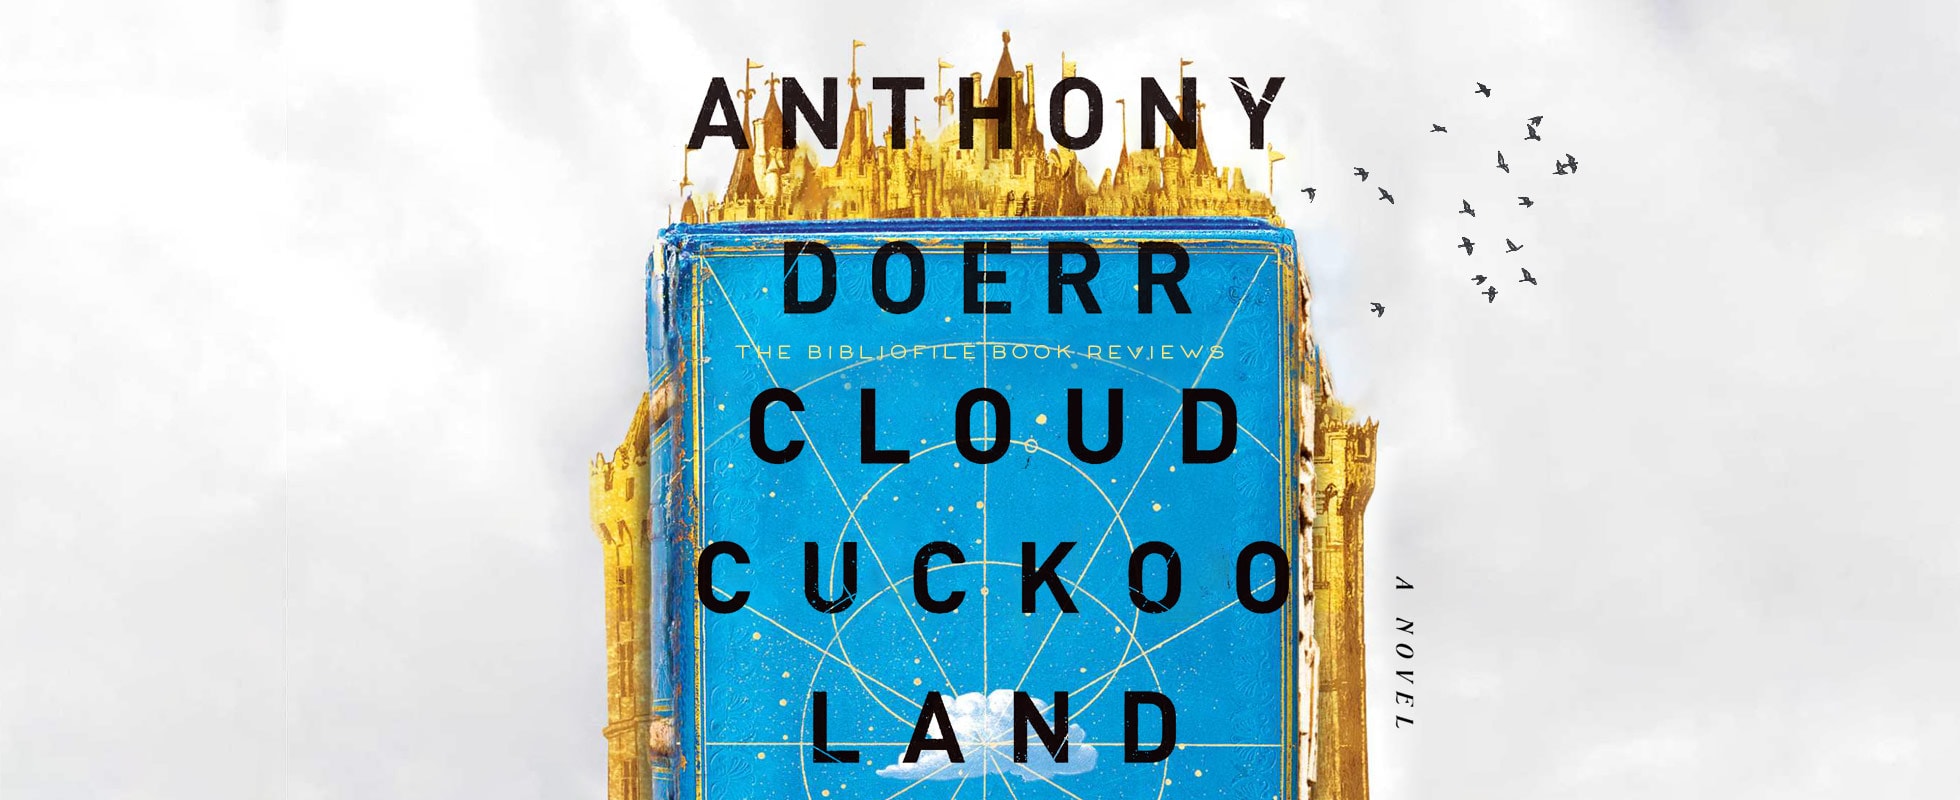 cloud cuckoo land by anthony doerr book review plot summary synopsis review ending discussion explanation analysis